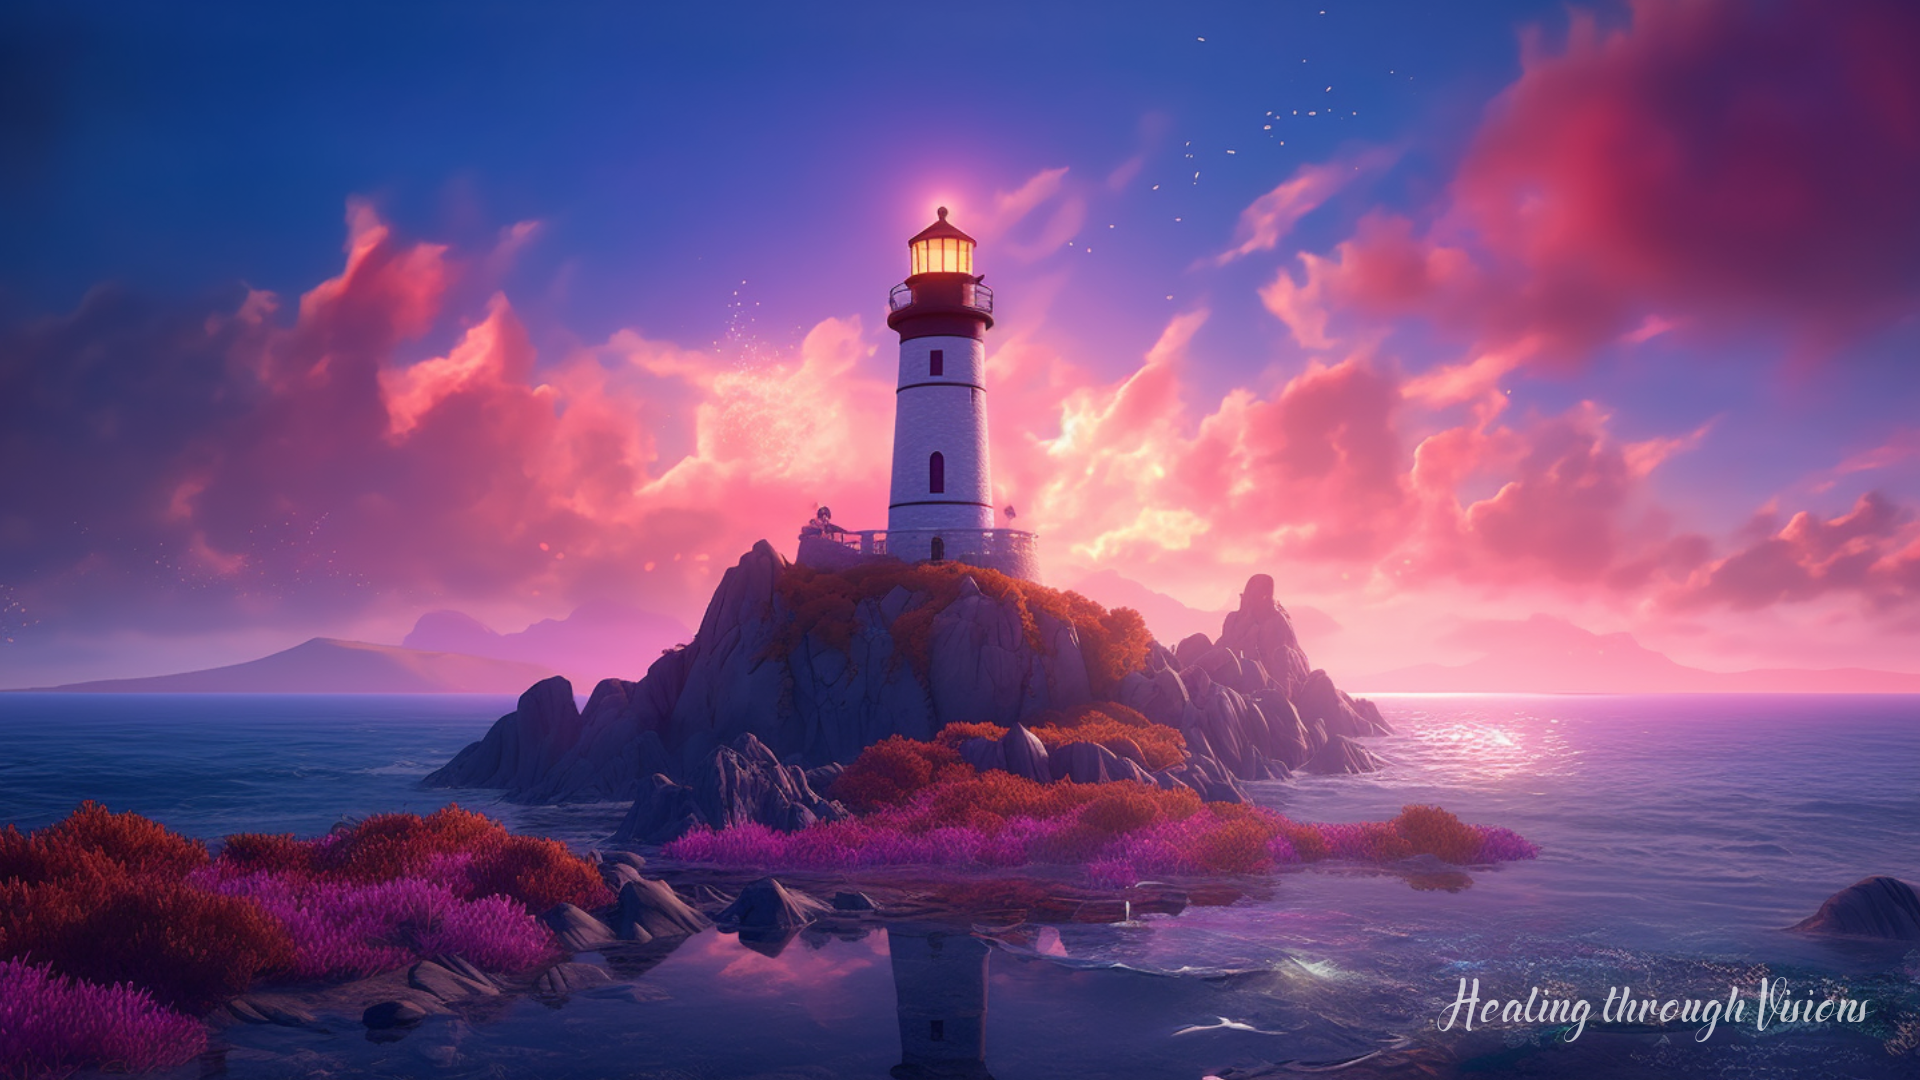 A powerful ancient, magical lighthouse high on an island hill is being restored in the future, the horizon is surrounded by vivid hues of purples and pinks representing safety, comfort and love, the sunlight reflects on the ocean waters.